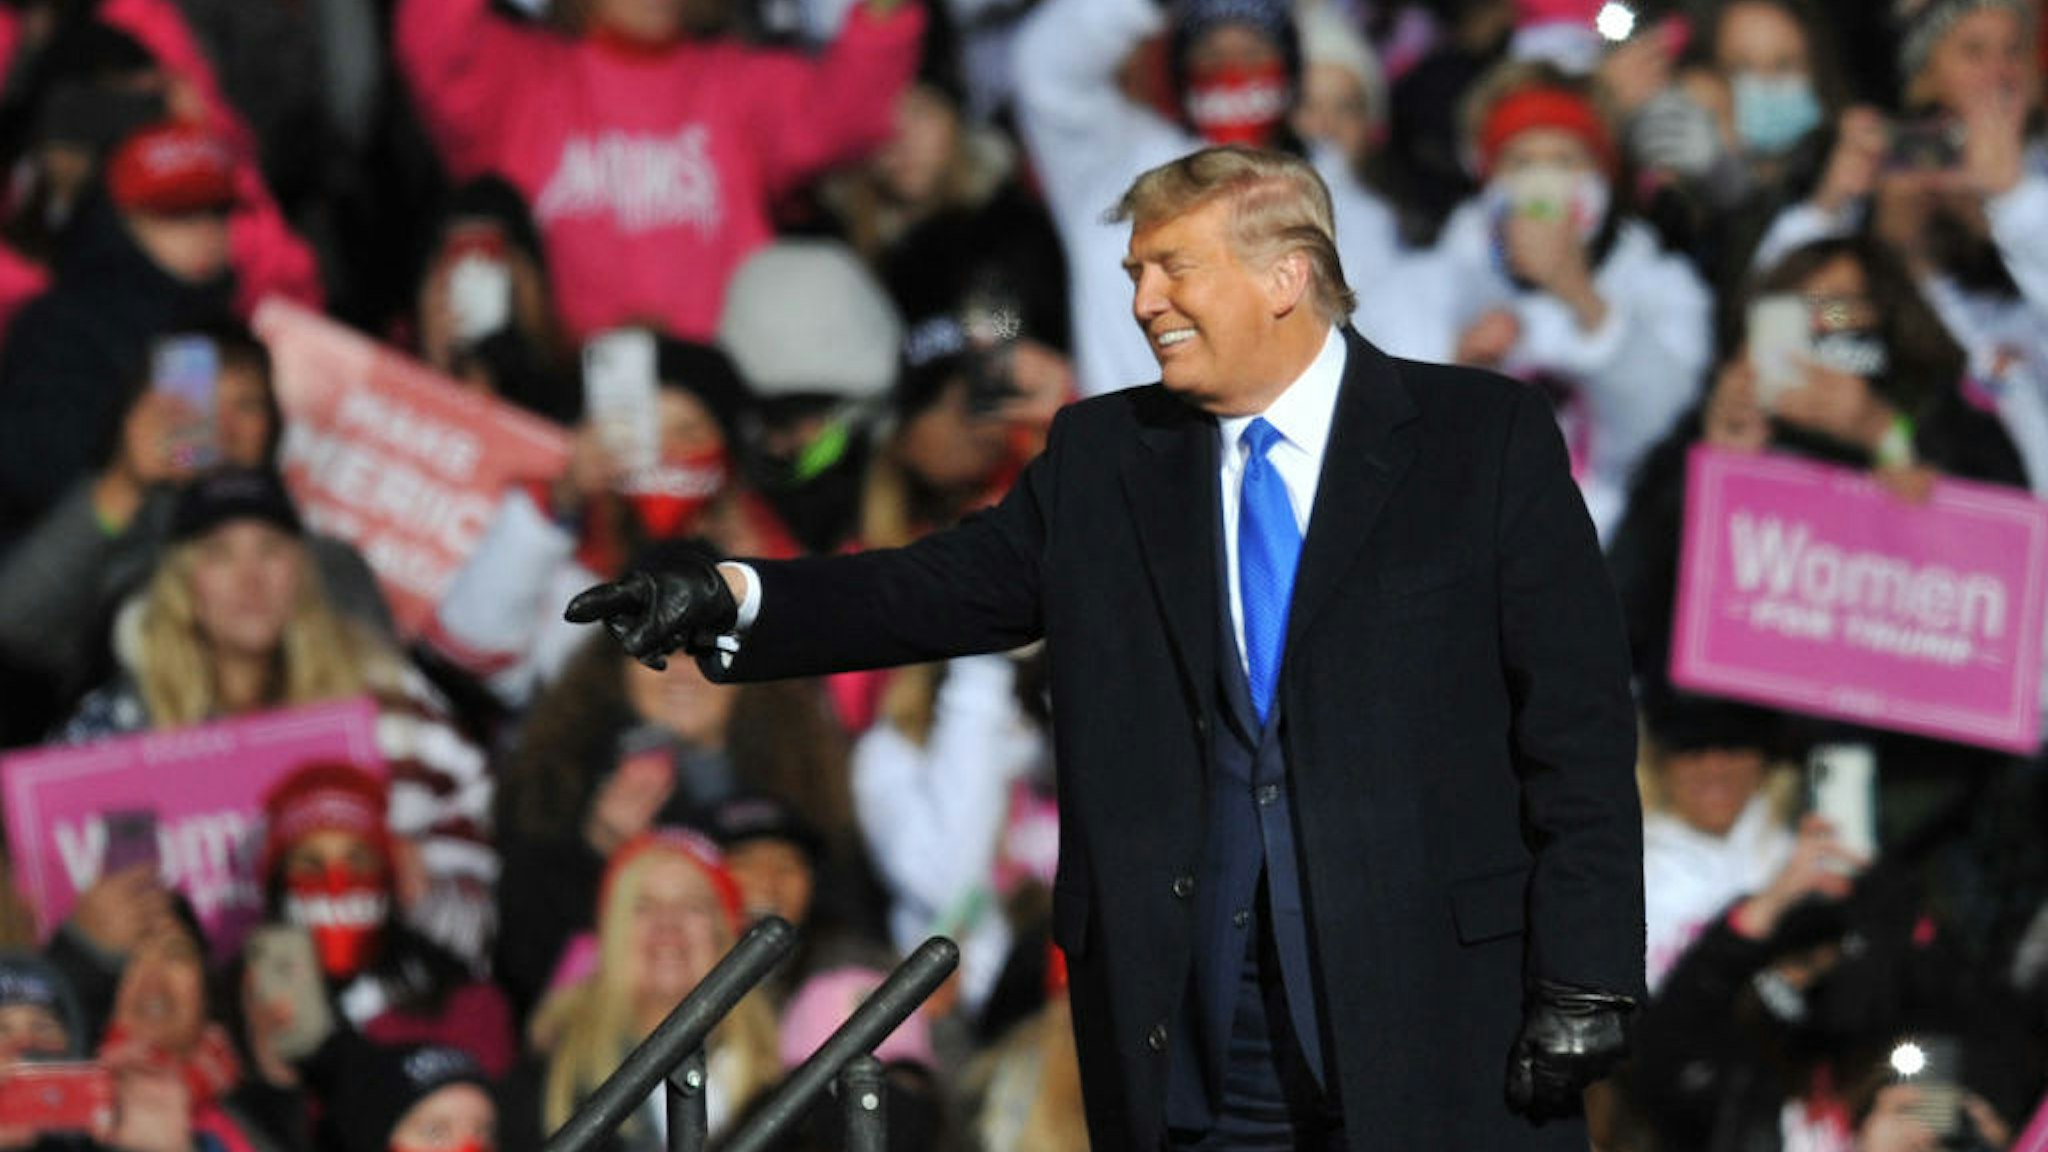 OMAHA, NE - OCTOBER 27: US President Donald Trump speaks during a campaign rally on October 27, 2020 in Omaha, Nebraska. With the presidential election one week away, candidates of both parties are attempting to secure their standings in important swing states. (Photo by Steve Pope/Getty Images)